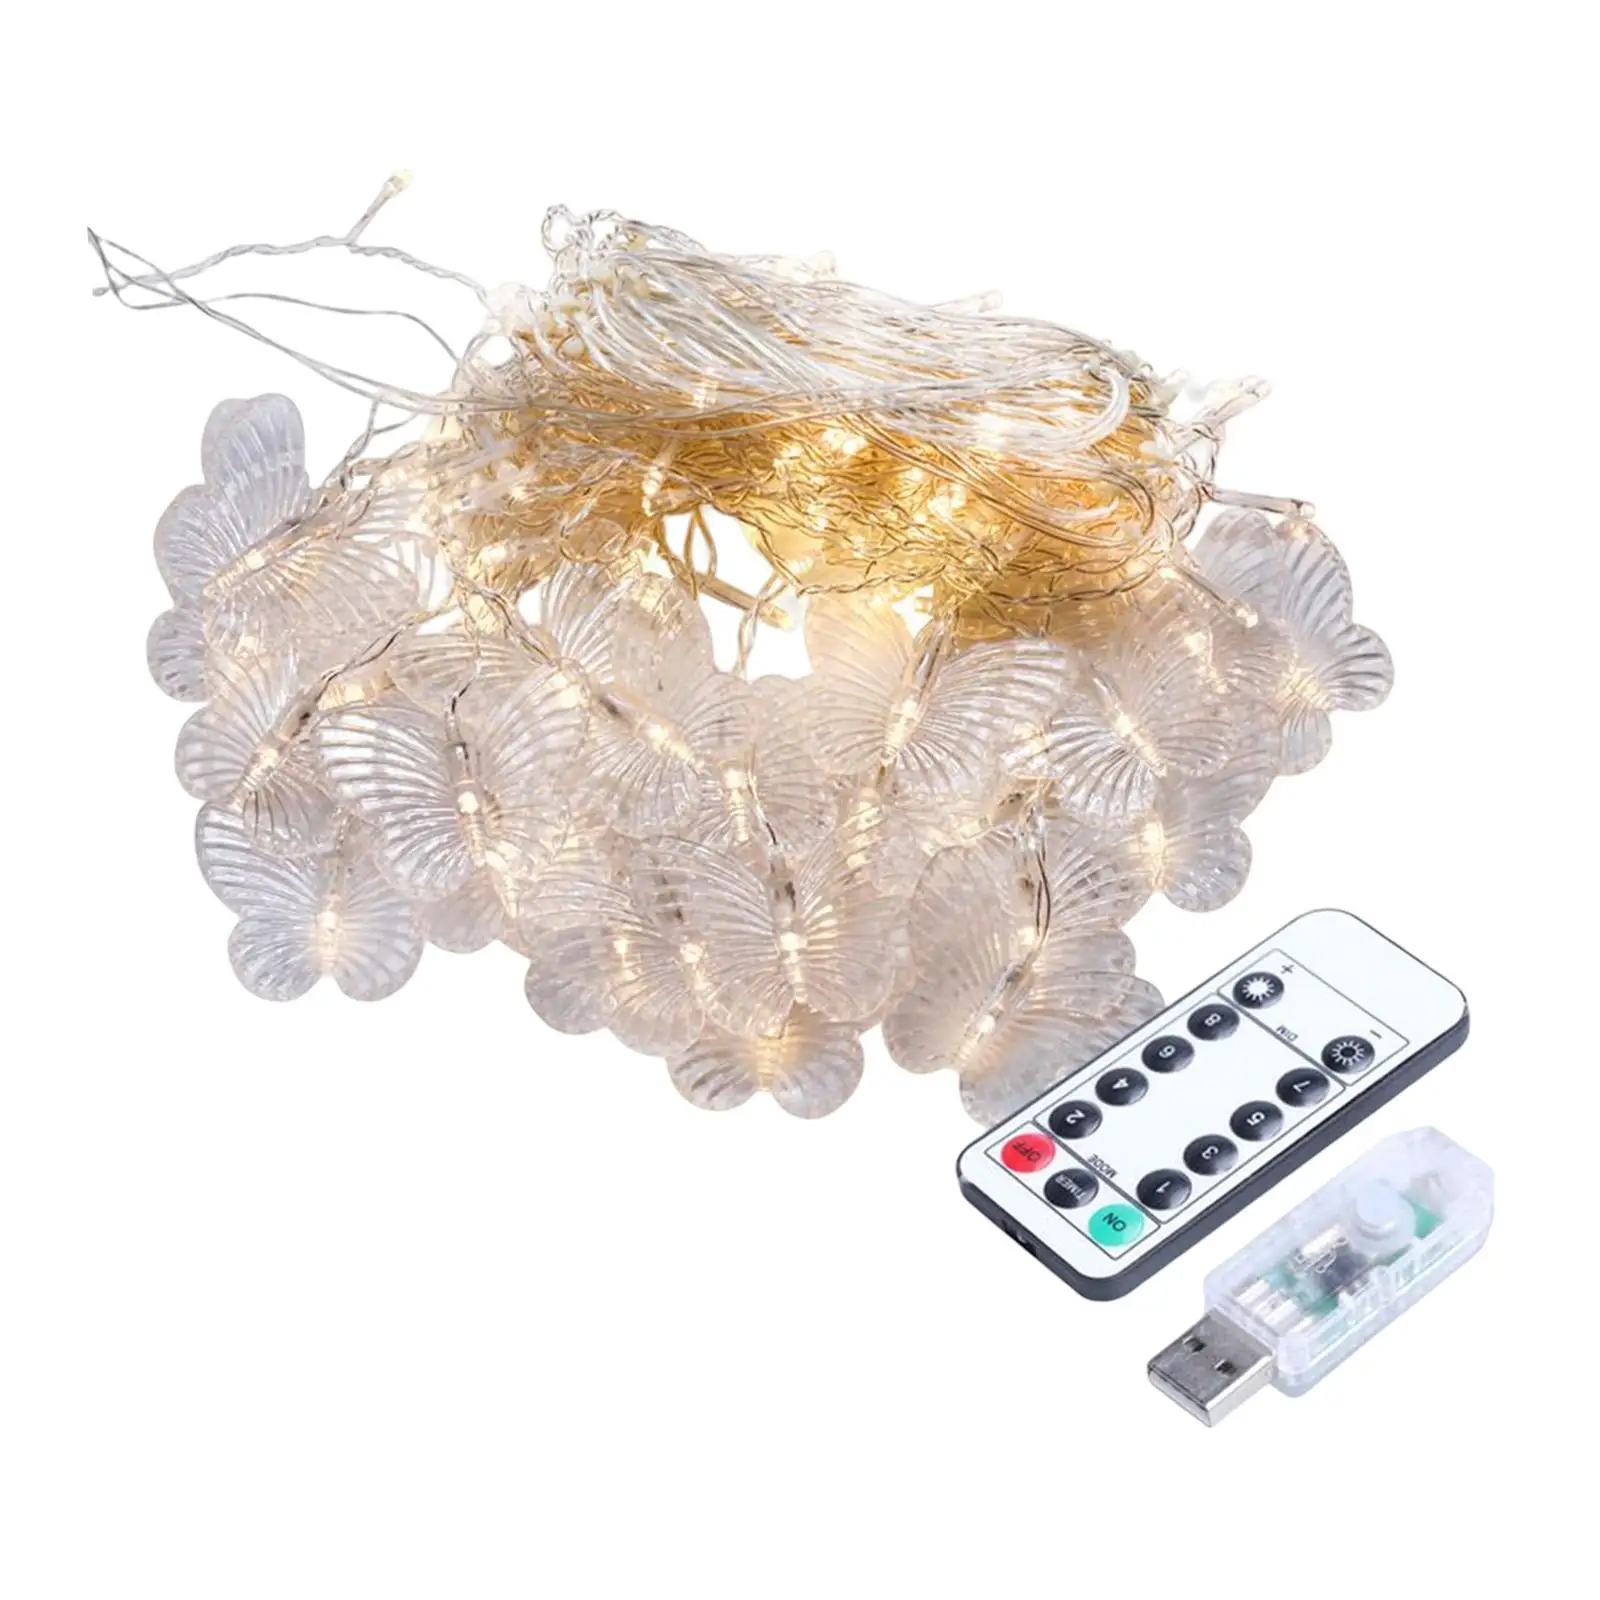 Butterfly Hanging Ornaments 1.5M Decoration Remote Control for Festival Holiday